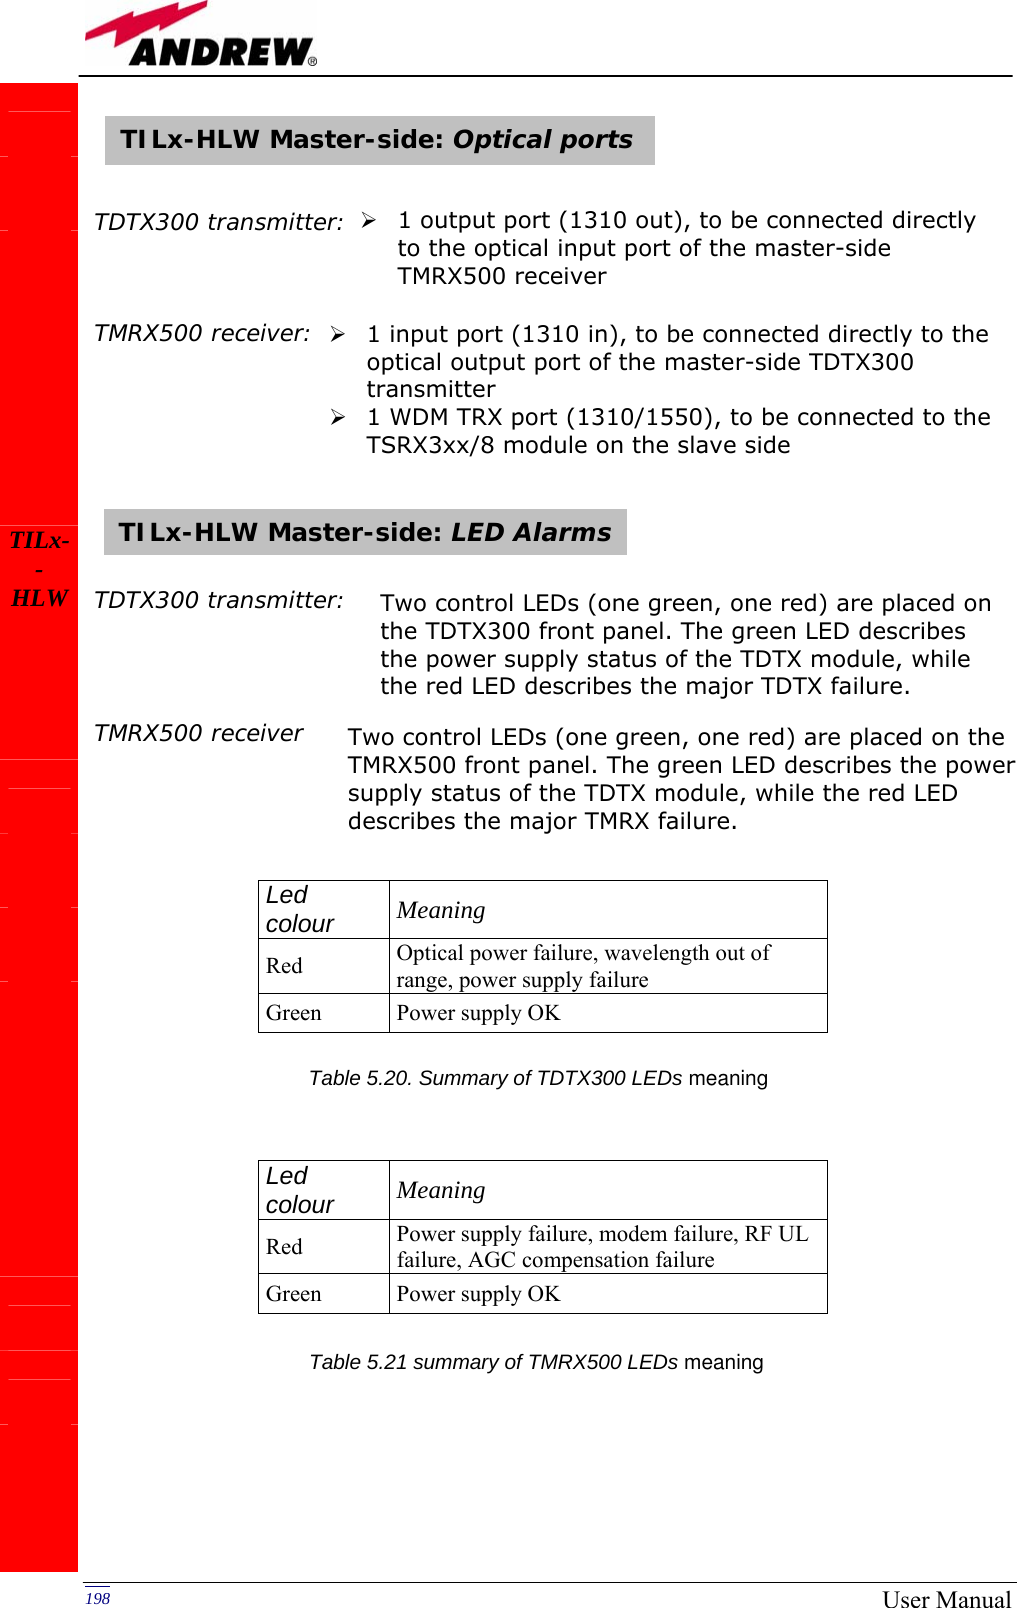   198 User Manual   TDTX300 transmitter:          TMRX500 receiver:               TDTX300 transmitter:          TMRX500 receiver                            TILx- -HLW              Led colour  Meaning Red  Optical power failure, wavelength out of range, power supply failure Green  Power supply OK Led colour  Meaning Red  Power supply failure, modem failure, RF UL failure, AGC compensation failure Green  Power supply OK ¾ 1 input port (1310 in), to be connected directly to the optical output port of the master-side TDTX300 transmitter ¾ 1 WDM TRX port (1310/1550), to be connected to the TSRX3xx/8 module on the slave side ¾ 1 output port (1310 out), to be connected directly to the optical input port of the master-side TMRX500 receiver Two control LEDs (one green, one red) are placed on the TDTX300 front panel. The green LED describes the power supply status of the TDTX module, while the red LED describes the major TDTX failure. Two control LEDs (one green, one red) are placed on the TMRX500 front panel. The green LED describes the power supply status of the TDTX module, while the red LED describes the major TMRX failure. Table 5.20. Summary of TDTX300 LEDs meaningTable 5.21 summary of TMRX500 LEDs meaning TILx-HLW Master-side: Optical ports TILx-HLW Master-side: LED Alarms 